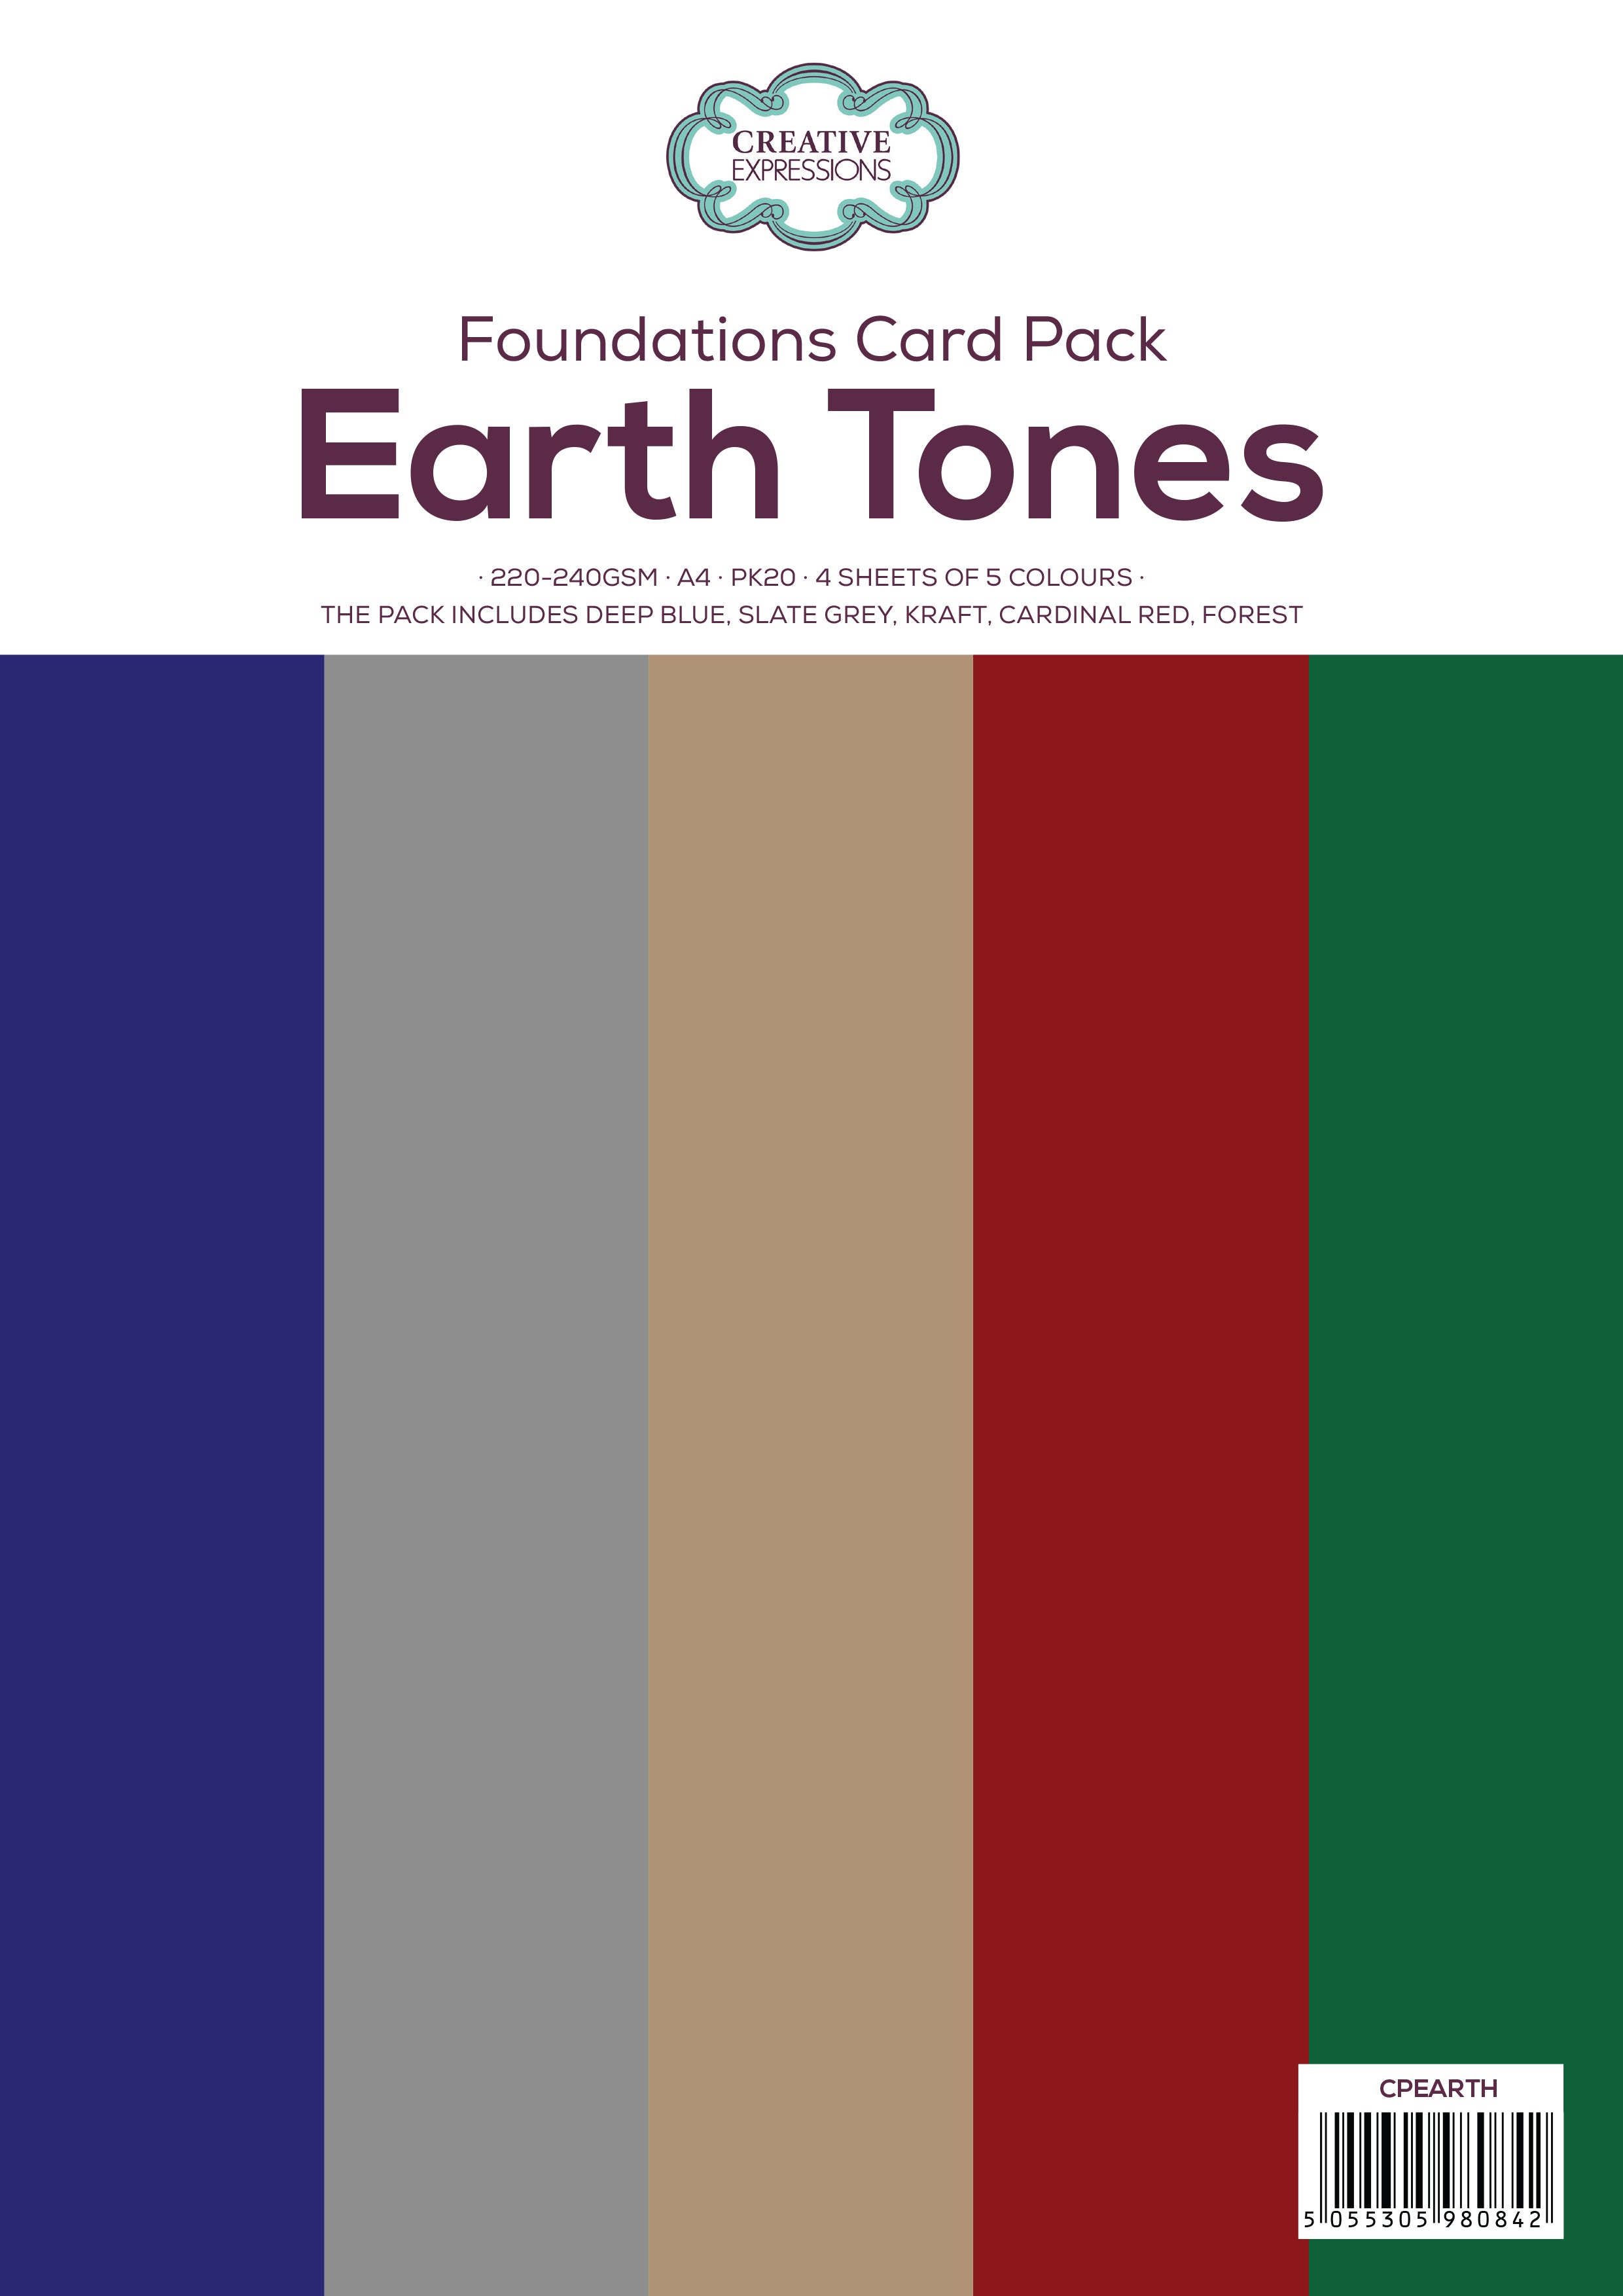 Creative Expressions Earth Tones Paper Pack 220-240gsm A4 Pk20 4 Sheets Of 5 Colours